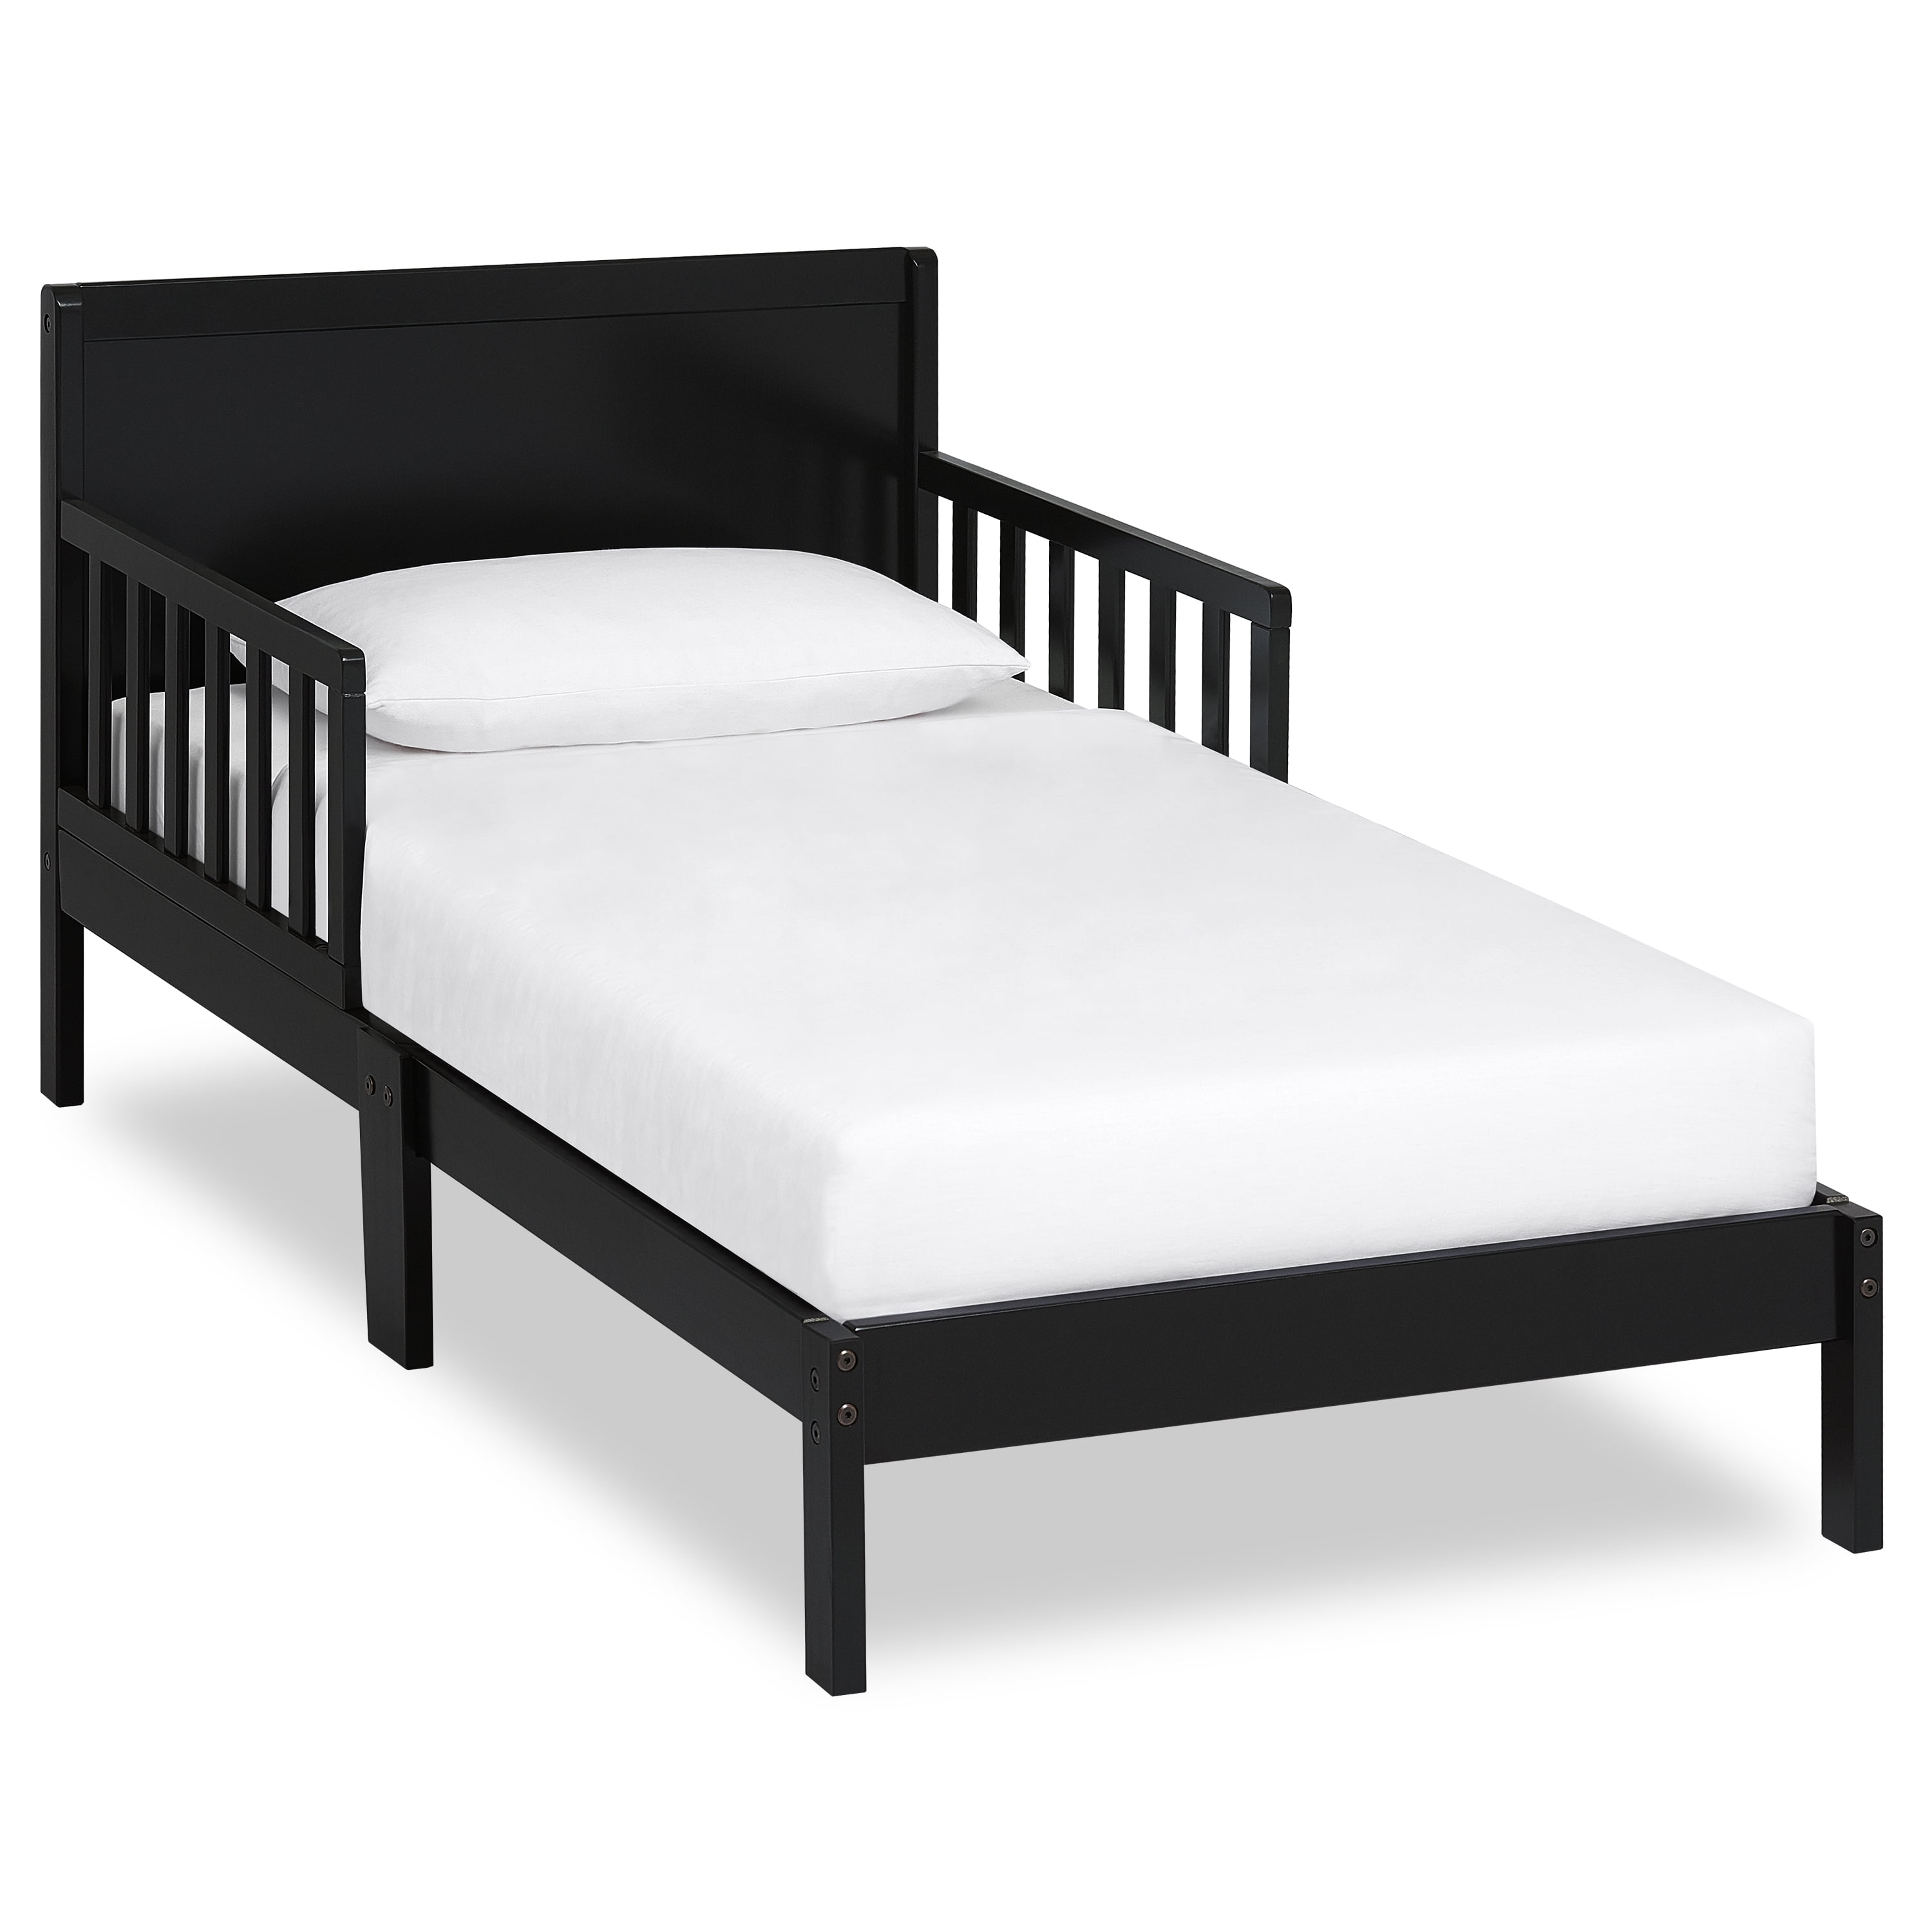 Fascinate Hearty The city Dream On Me Brookside Toddler Bed, Red - Walmart.com